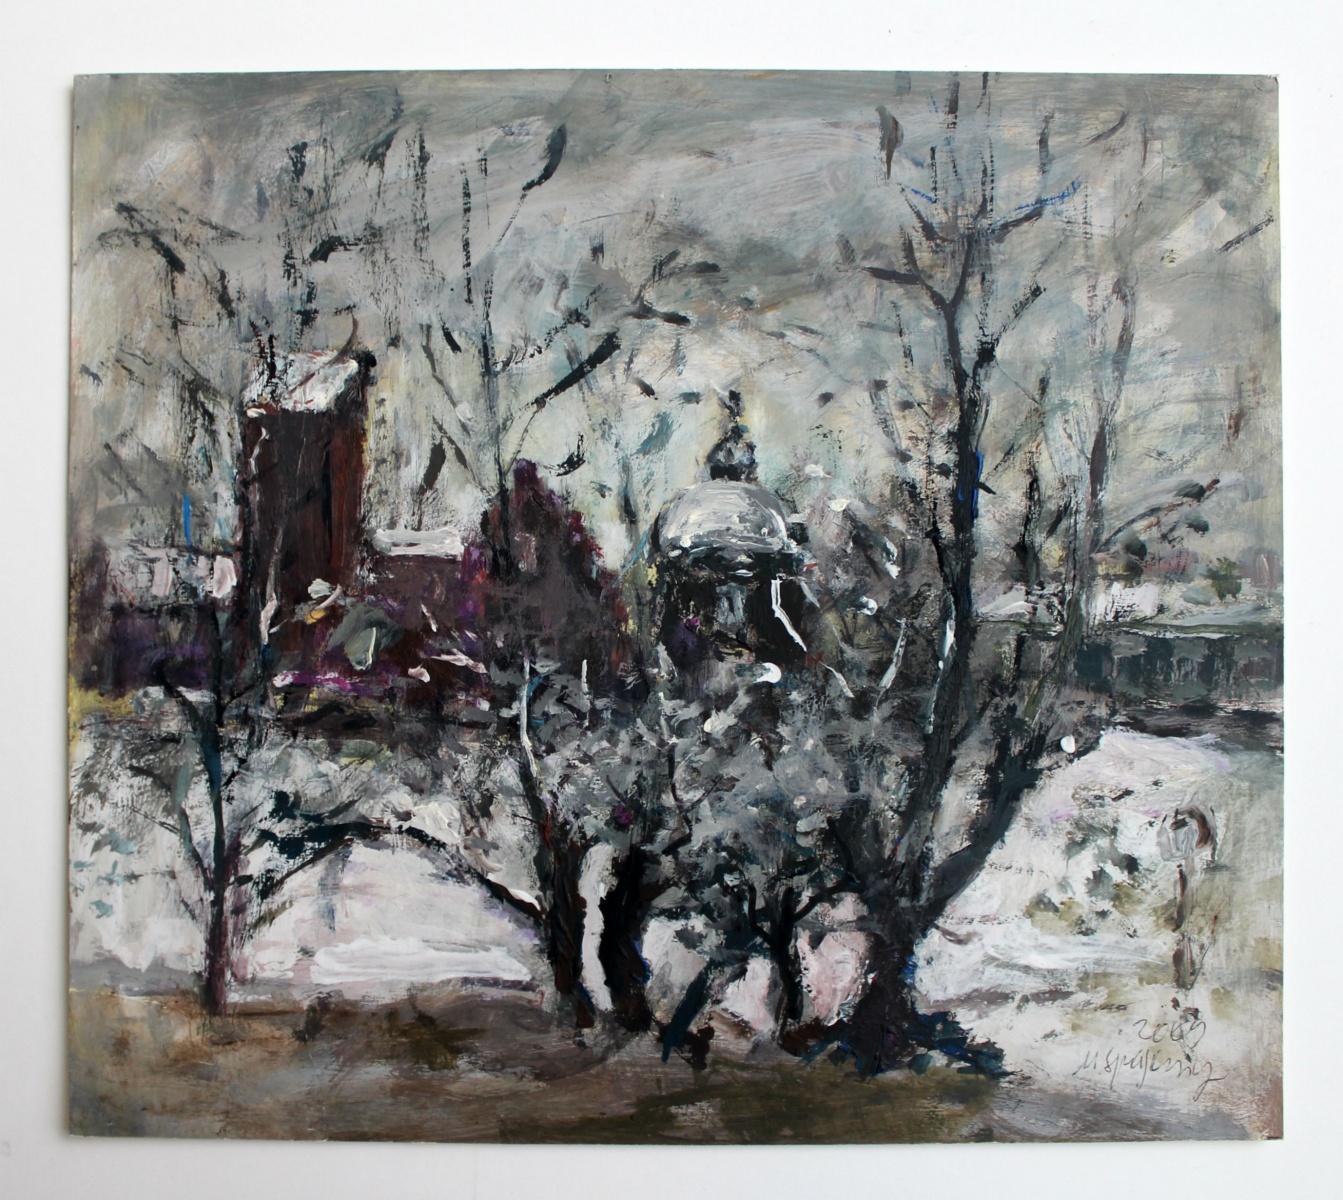 Warsaw - XXI century, Oil on canvas, Figurative, Landscape - Painting by Magdalena Spasowicz